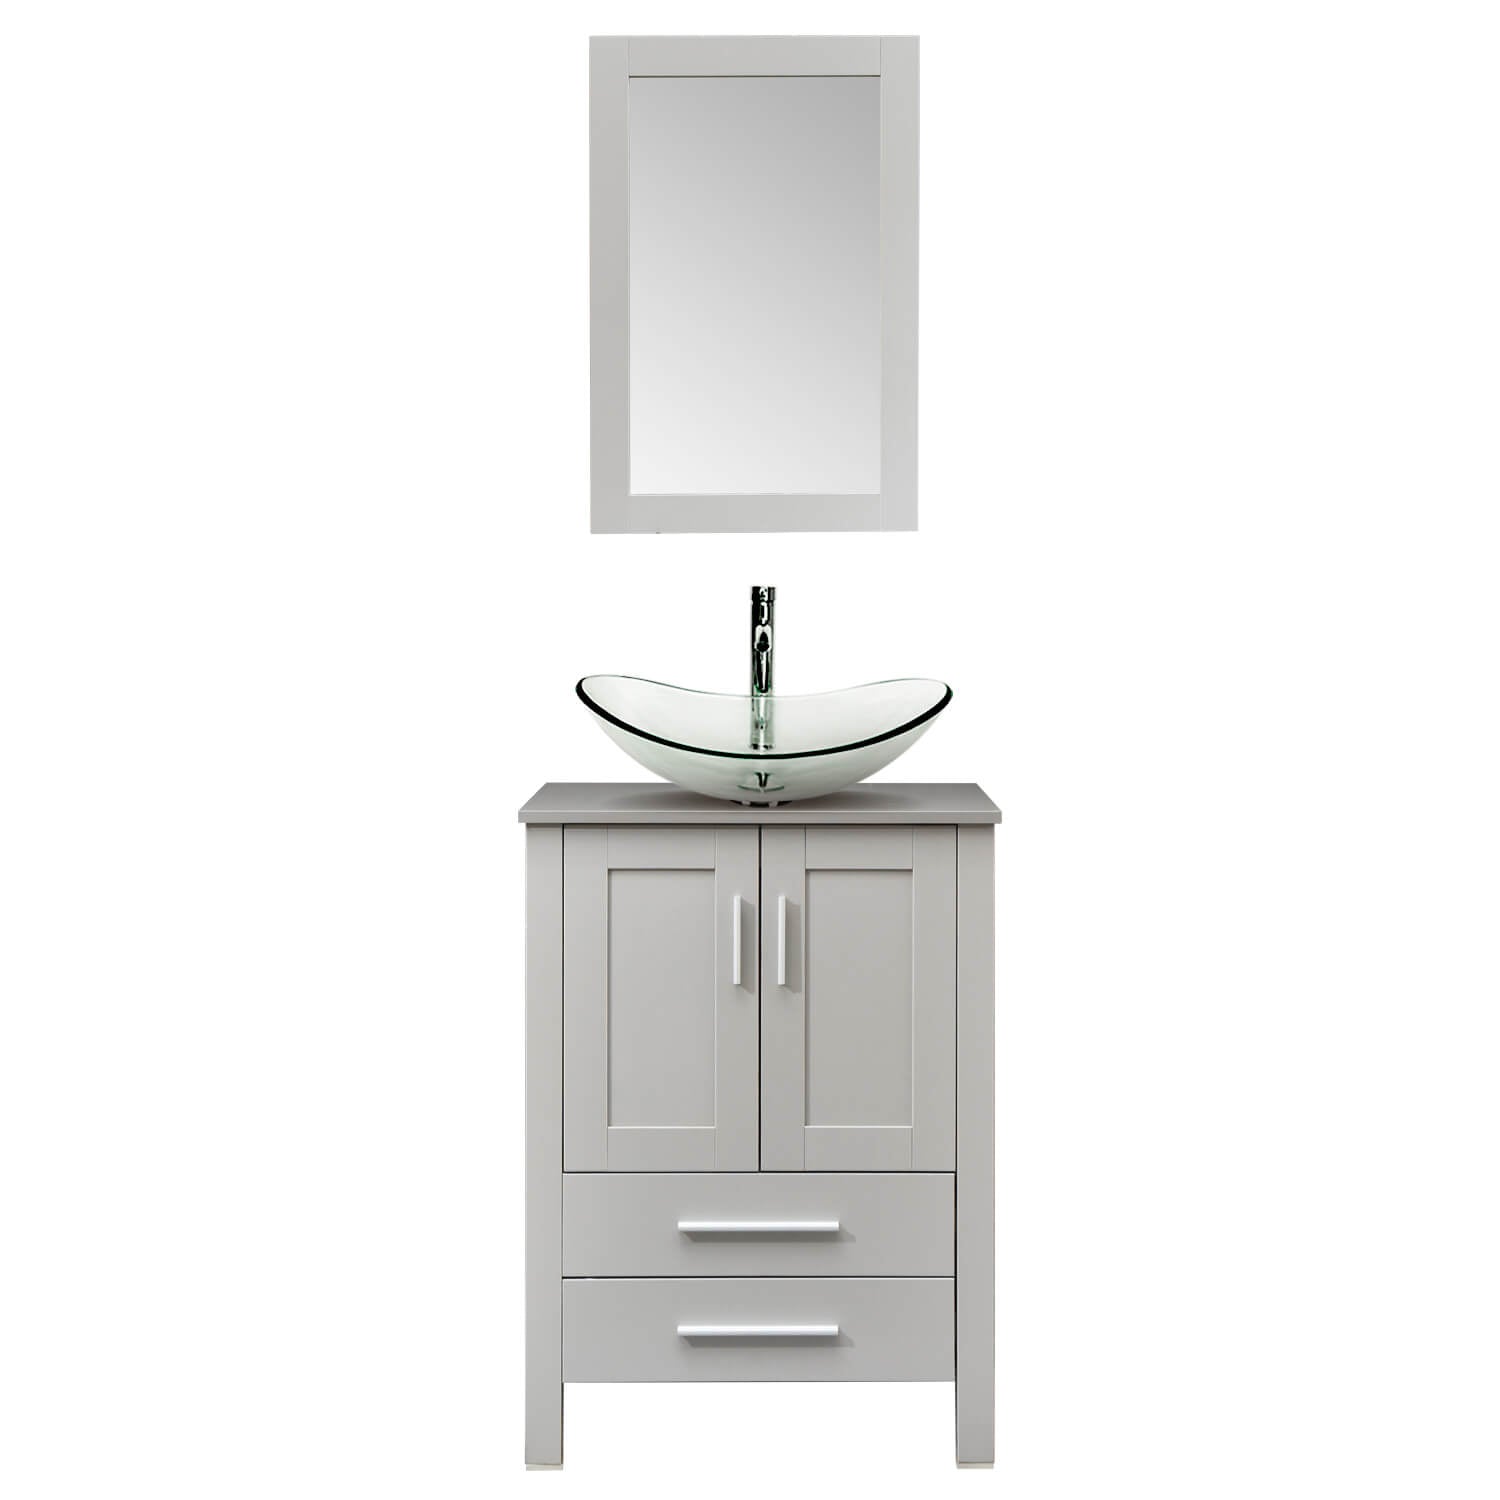 Elecwish gray wood bathroom vanity with boat clear sink BG007 in white background